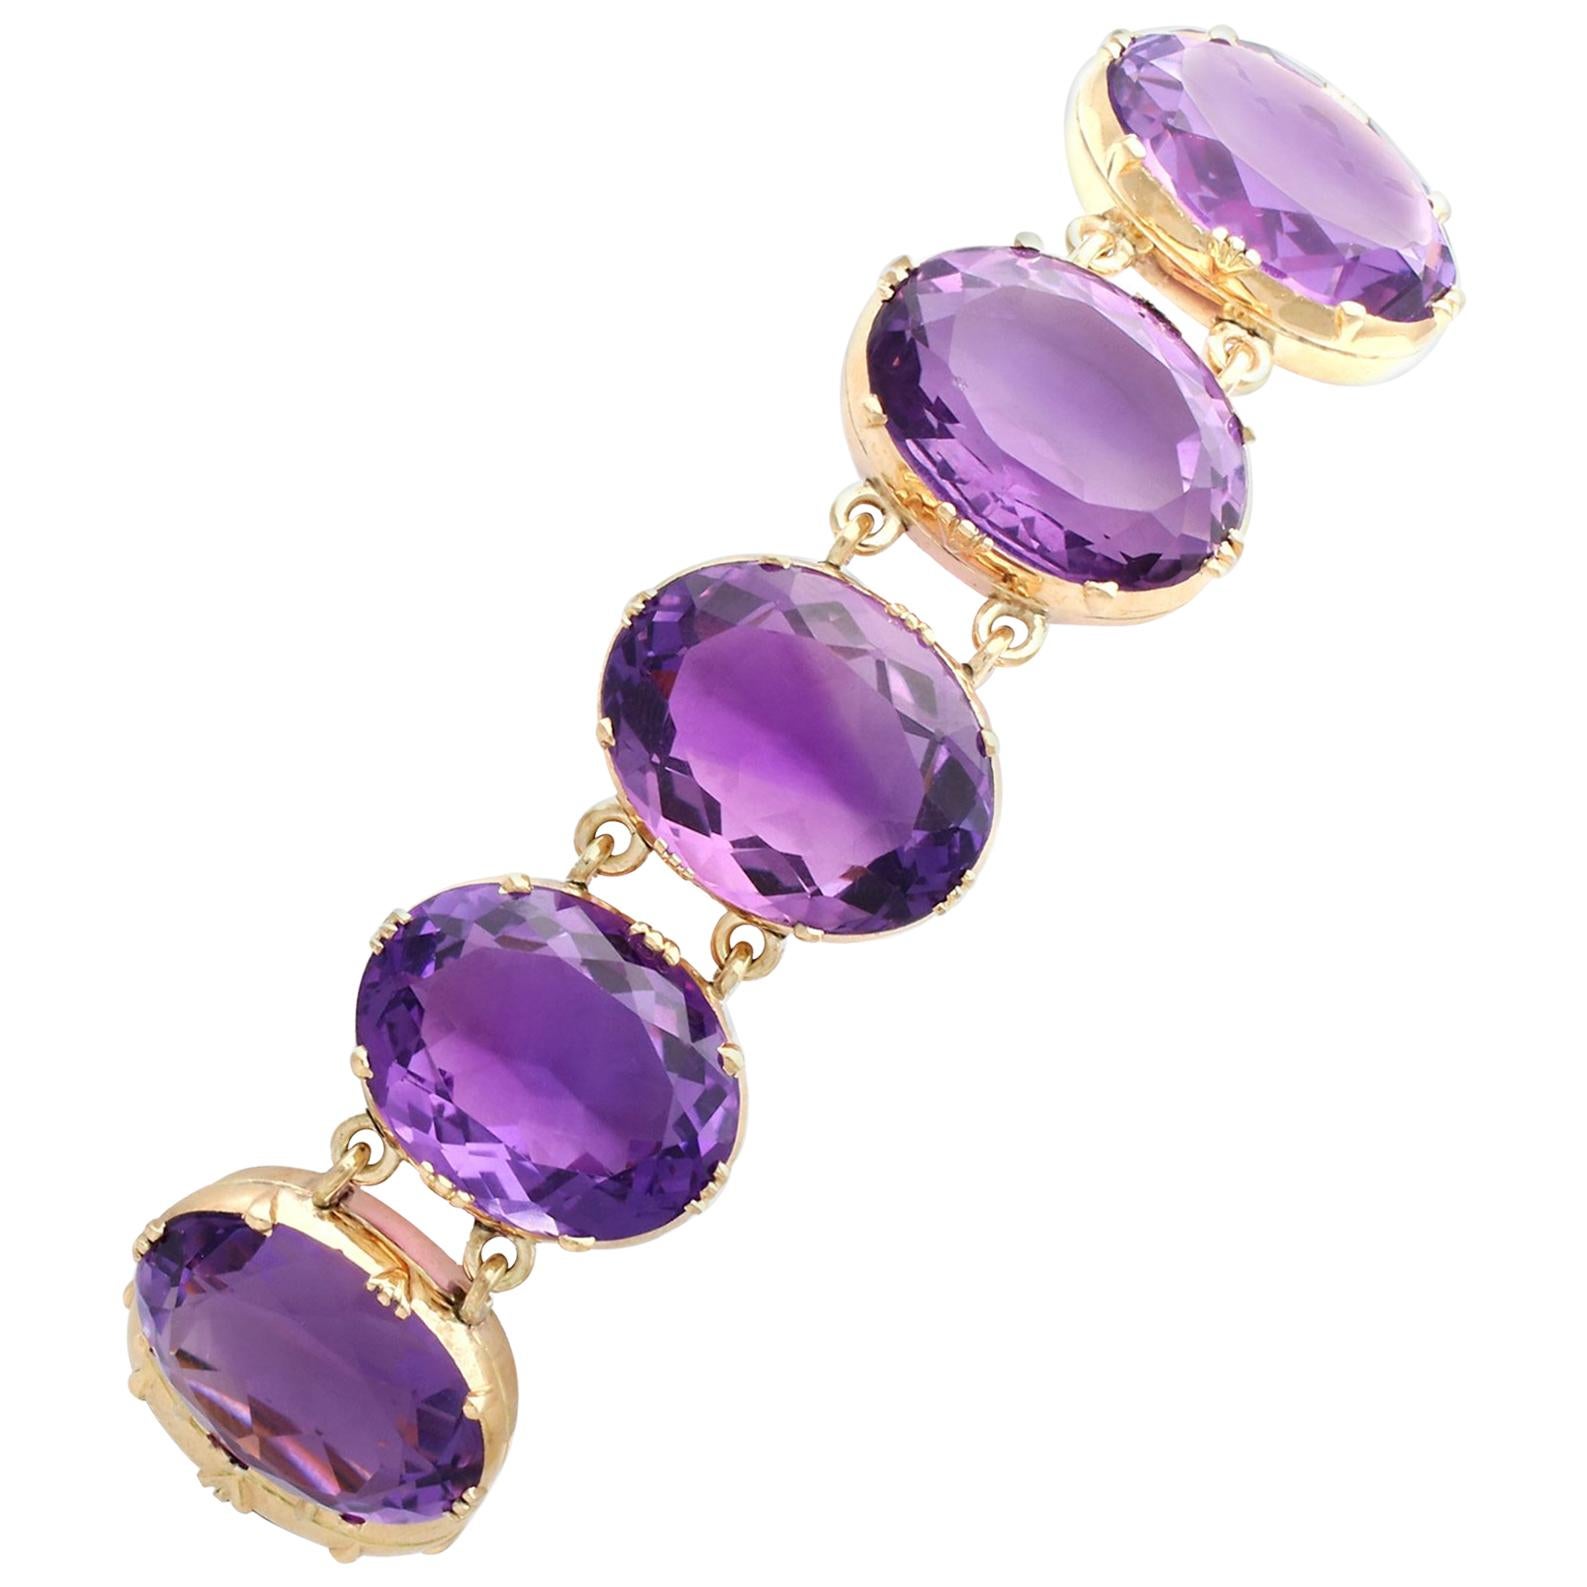 Victorian 193.38 Carat Amethyst and Yellow Gold Bracelet